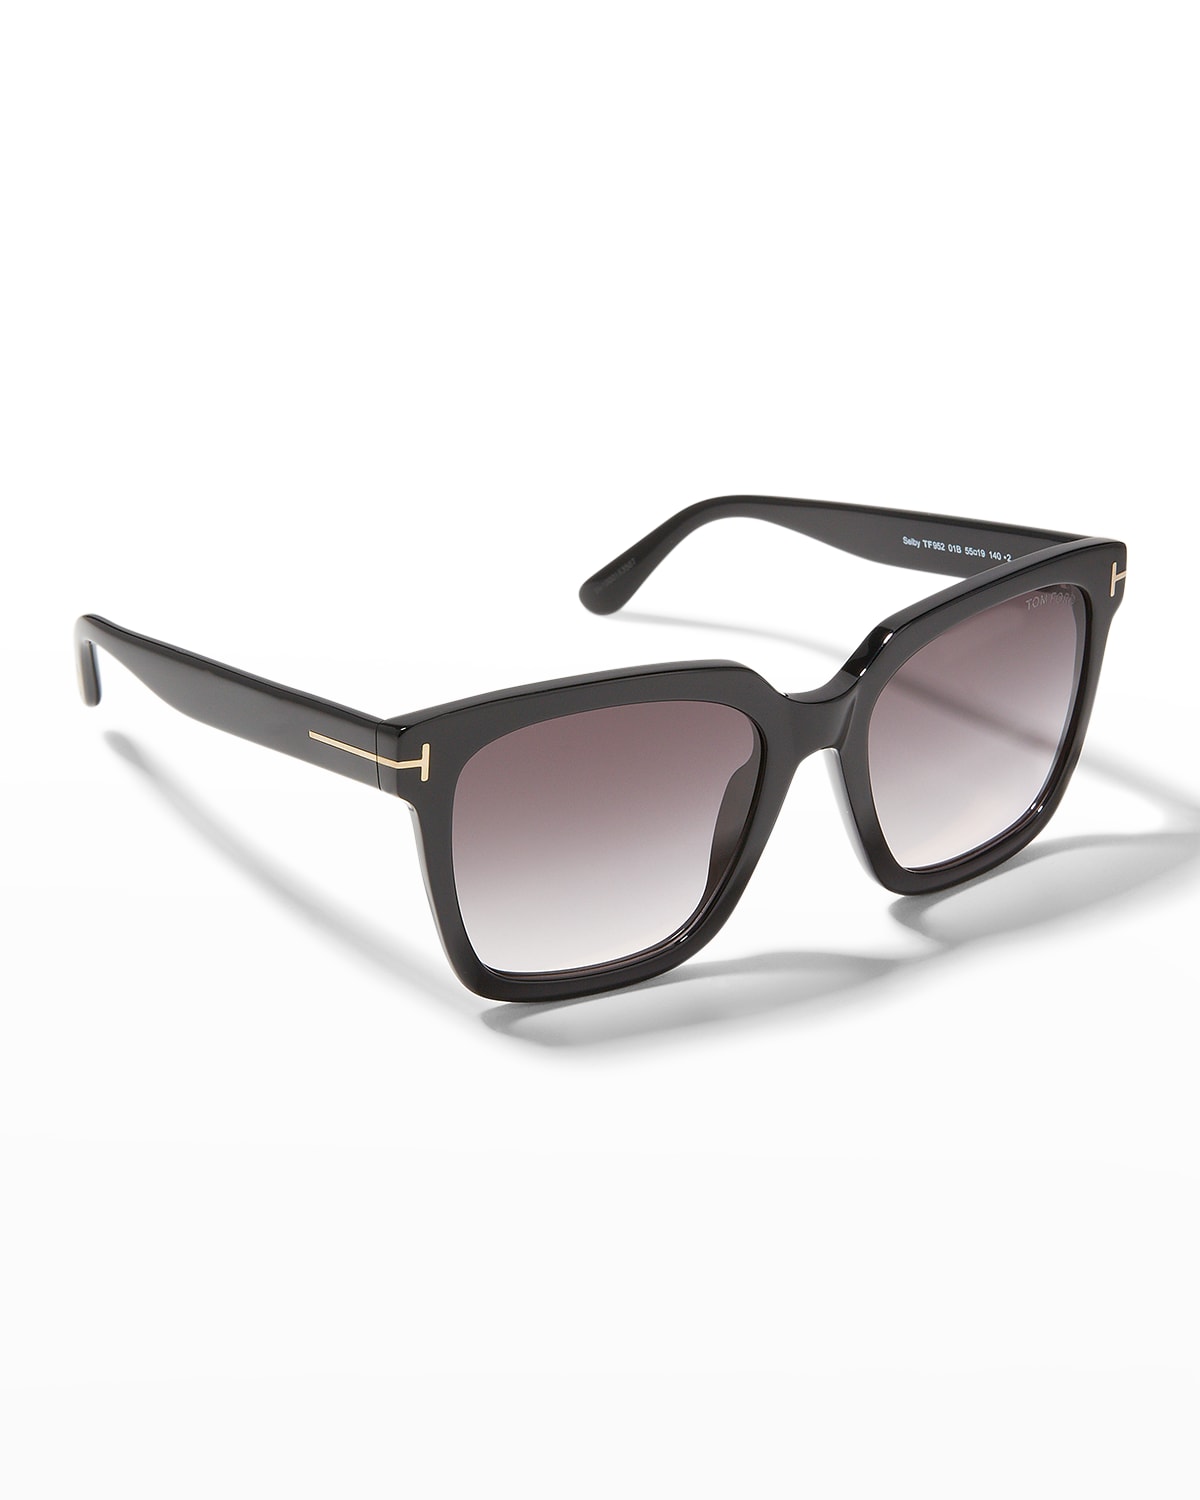 TOM FORD SELBY SQUARE PLASTIC SUNGLASSES